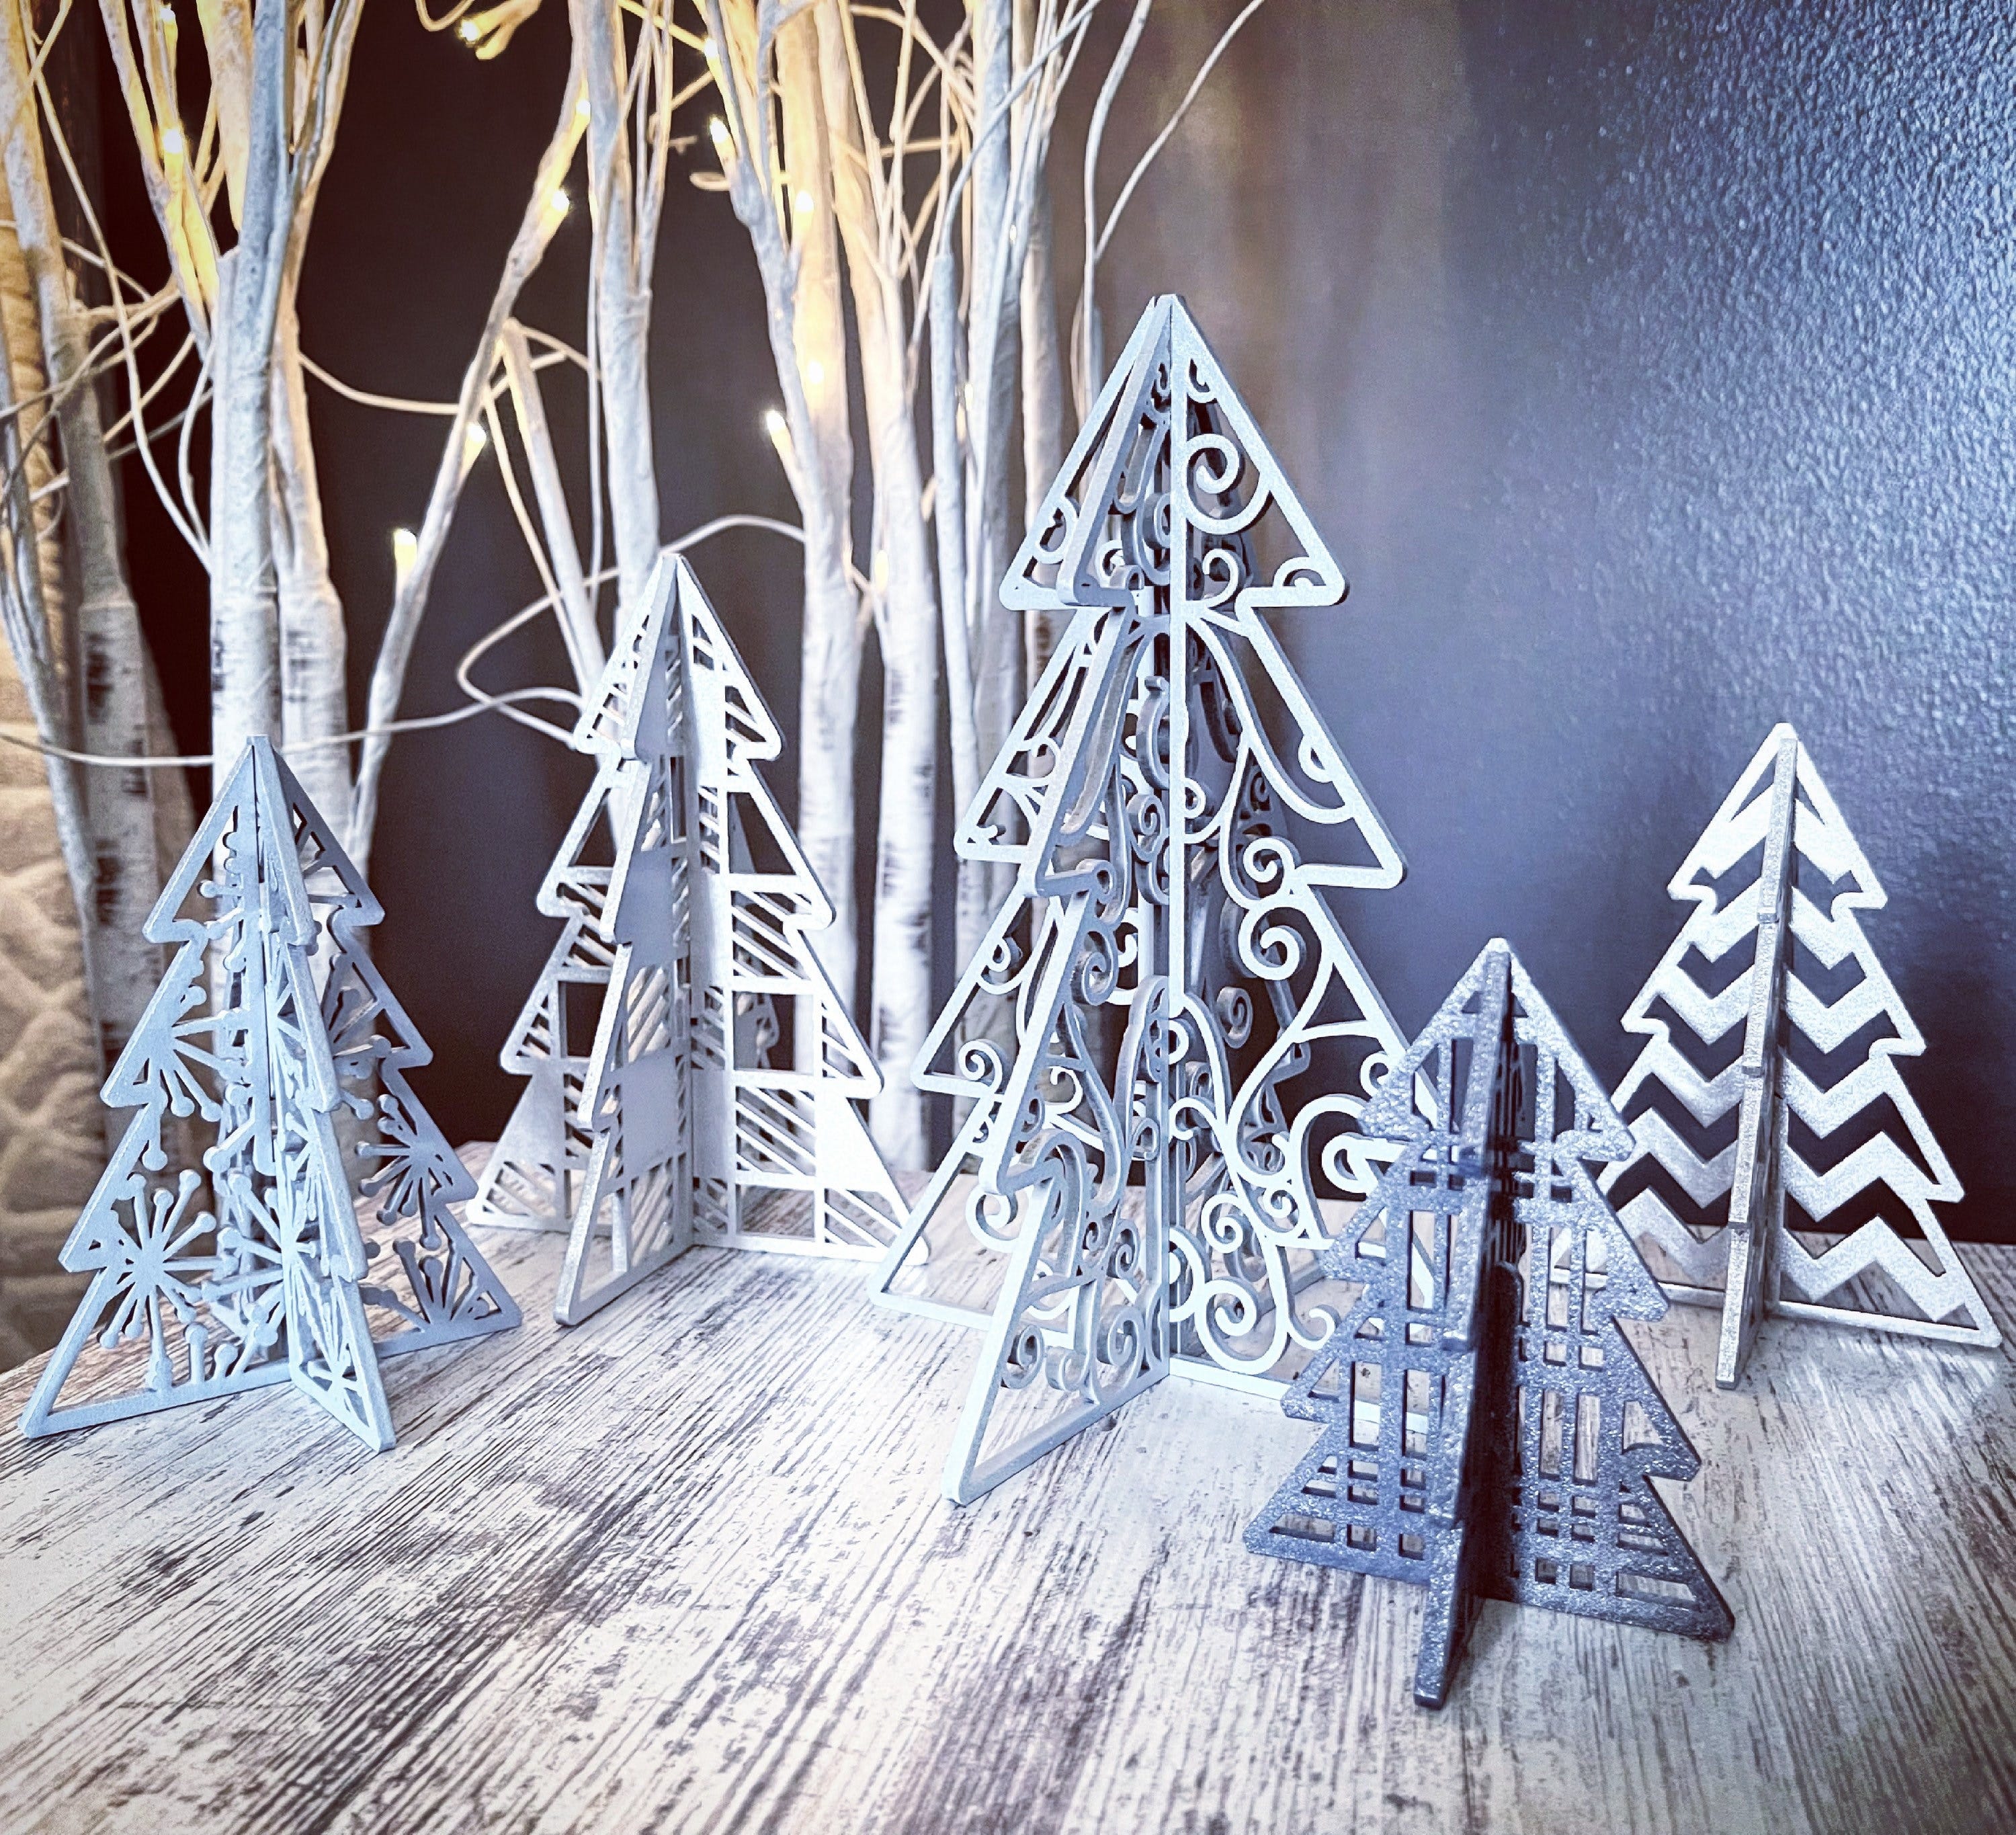 3D Patterned Standing Trees - Set of 5 - SVG Digital Download for Glowforge or Laser -Not a Physical Item -For 1/8” MATERIAL ONLY